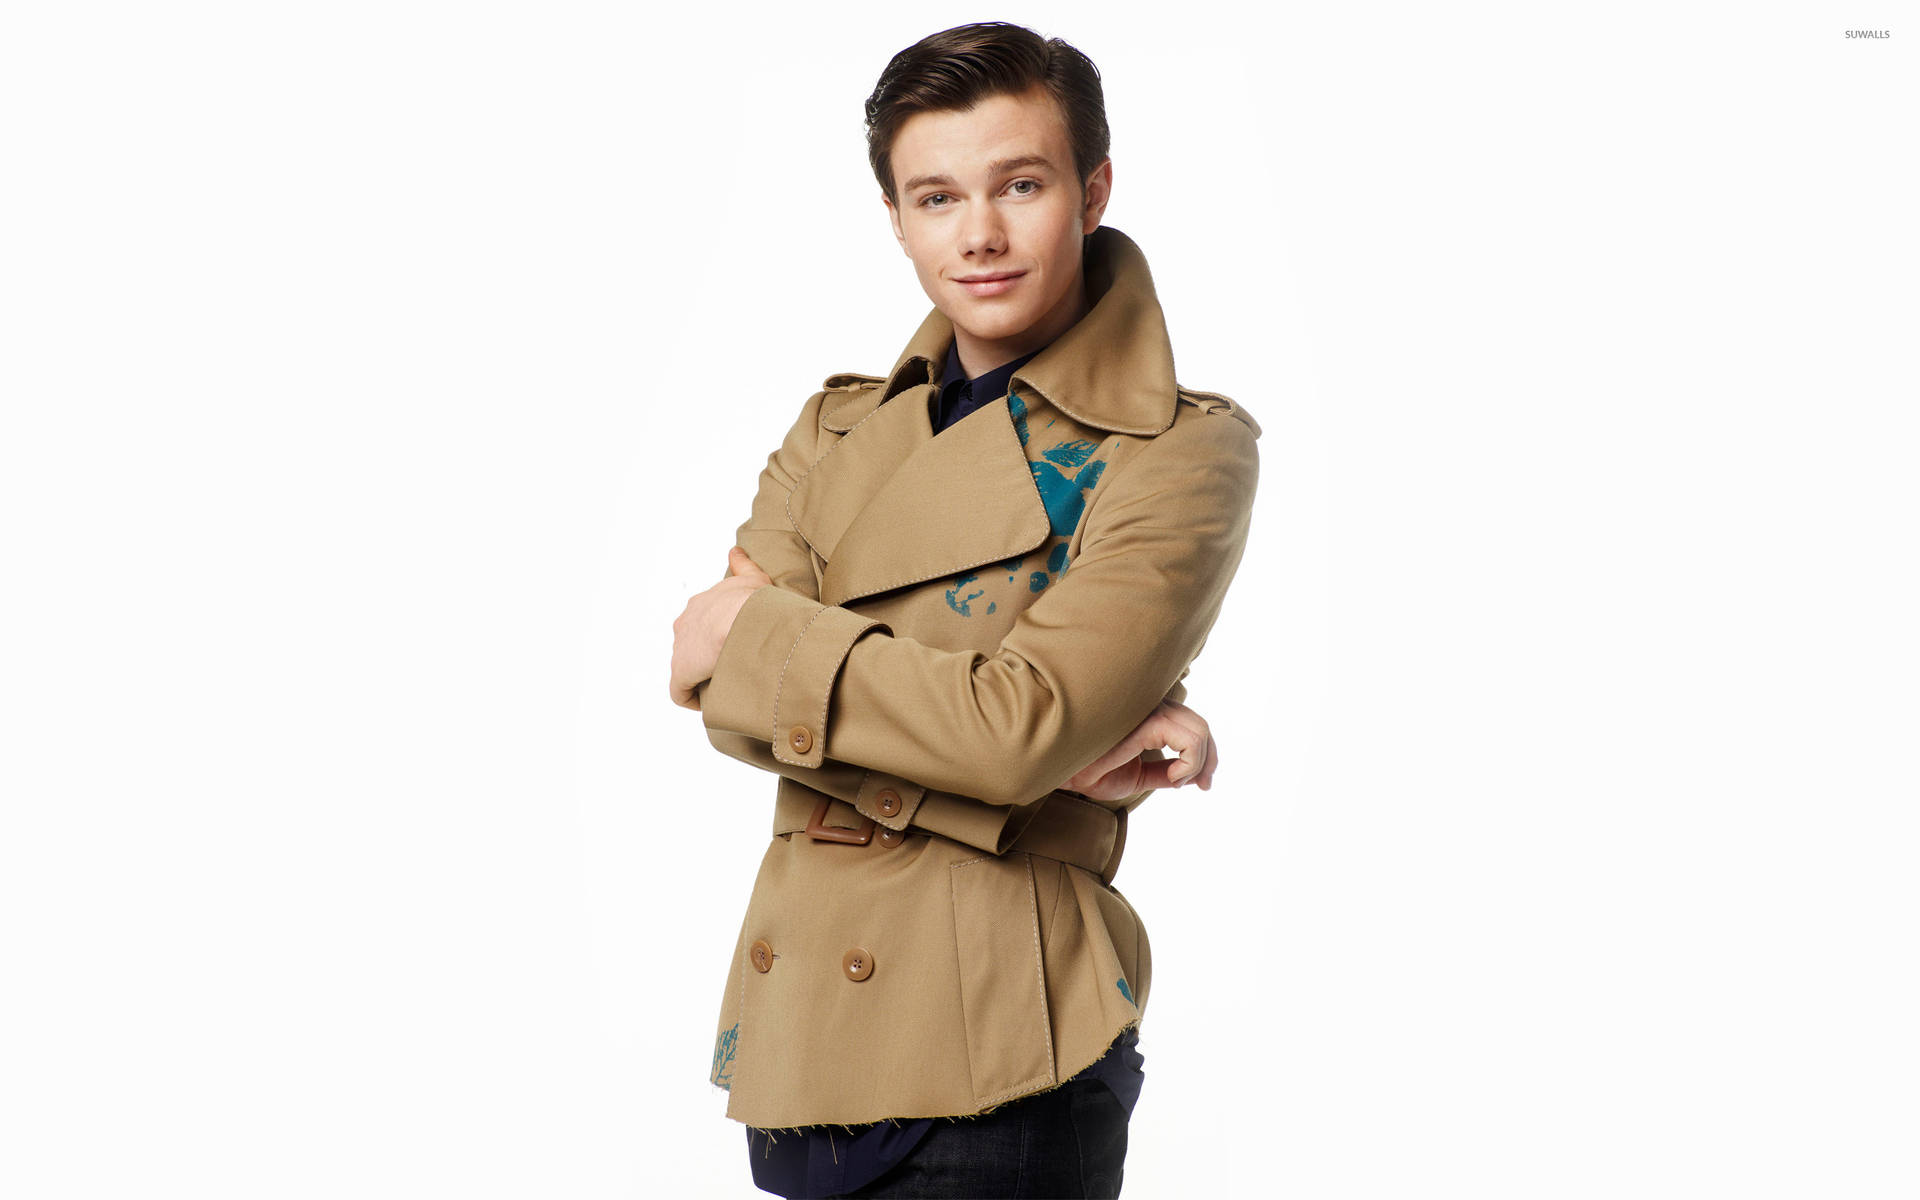 Chris Colfer American Author Background